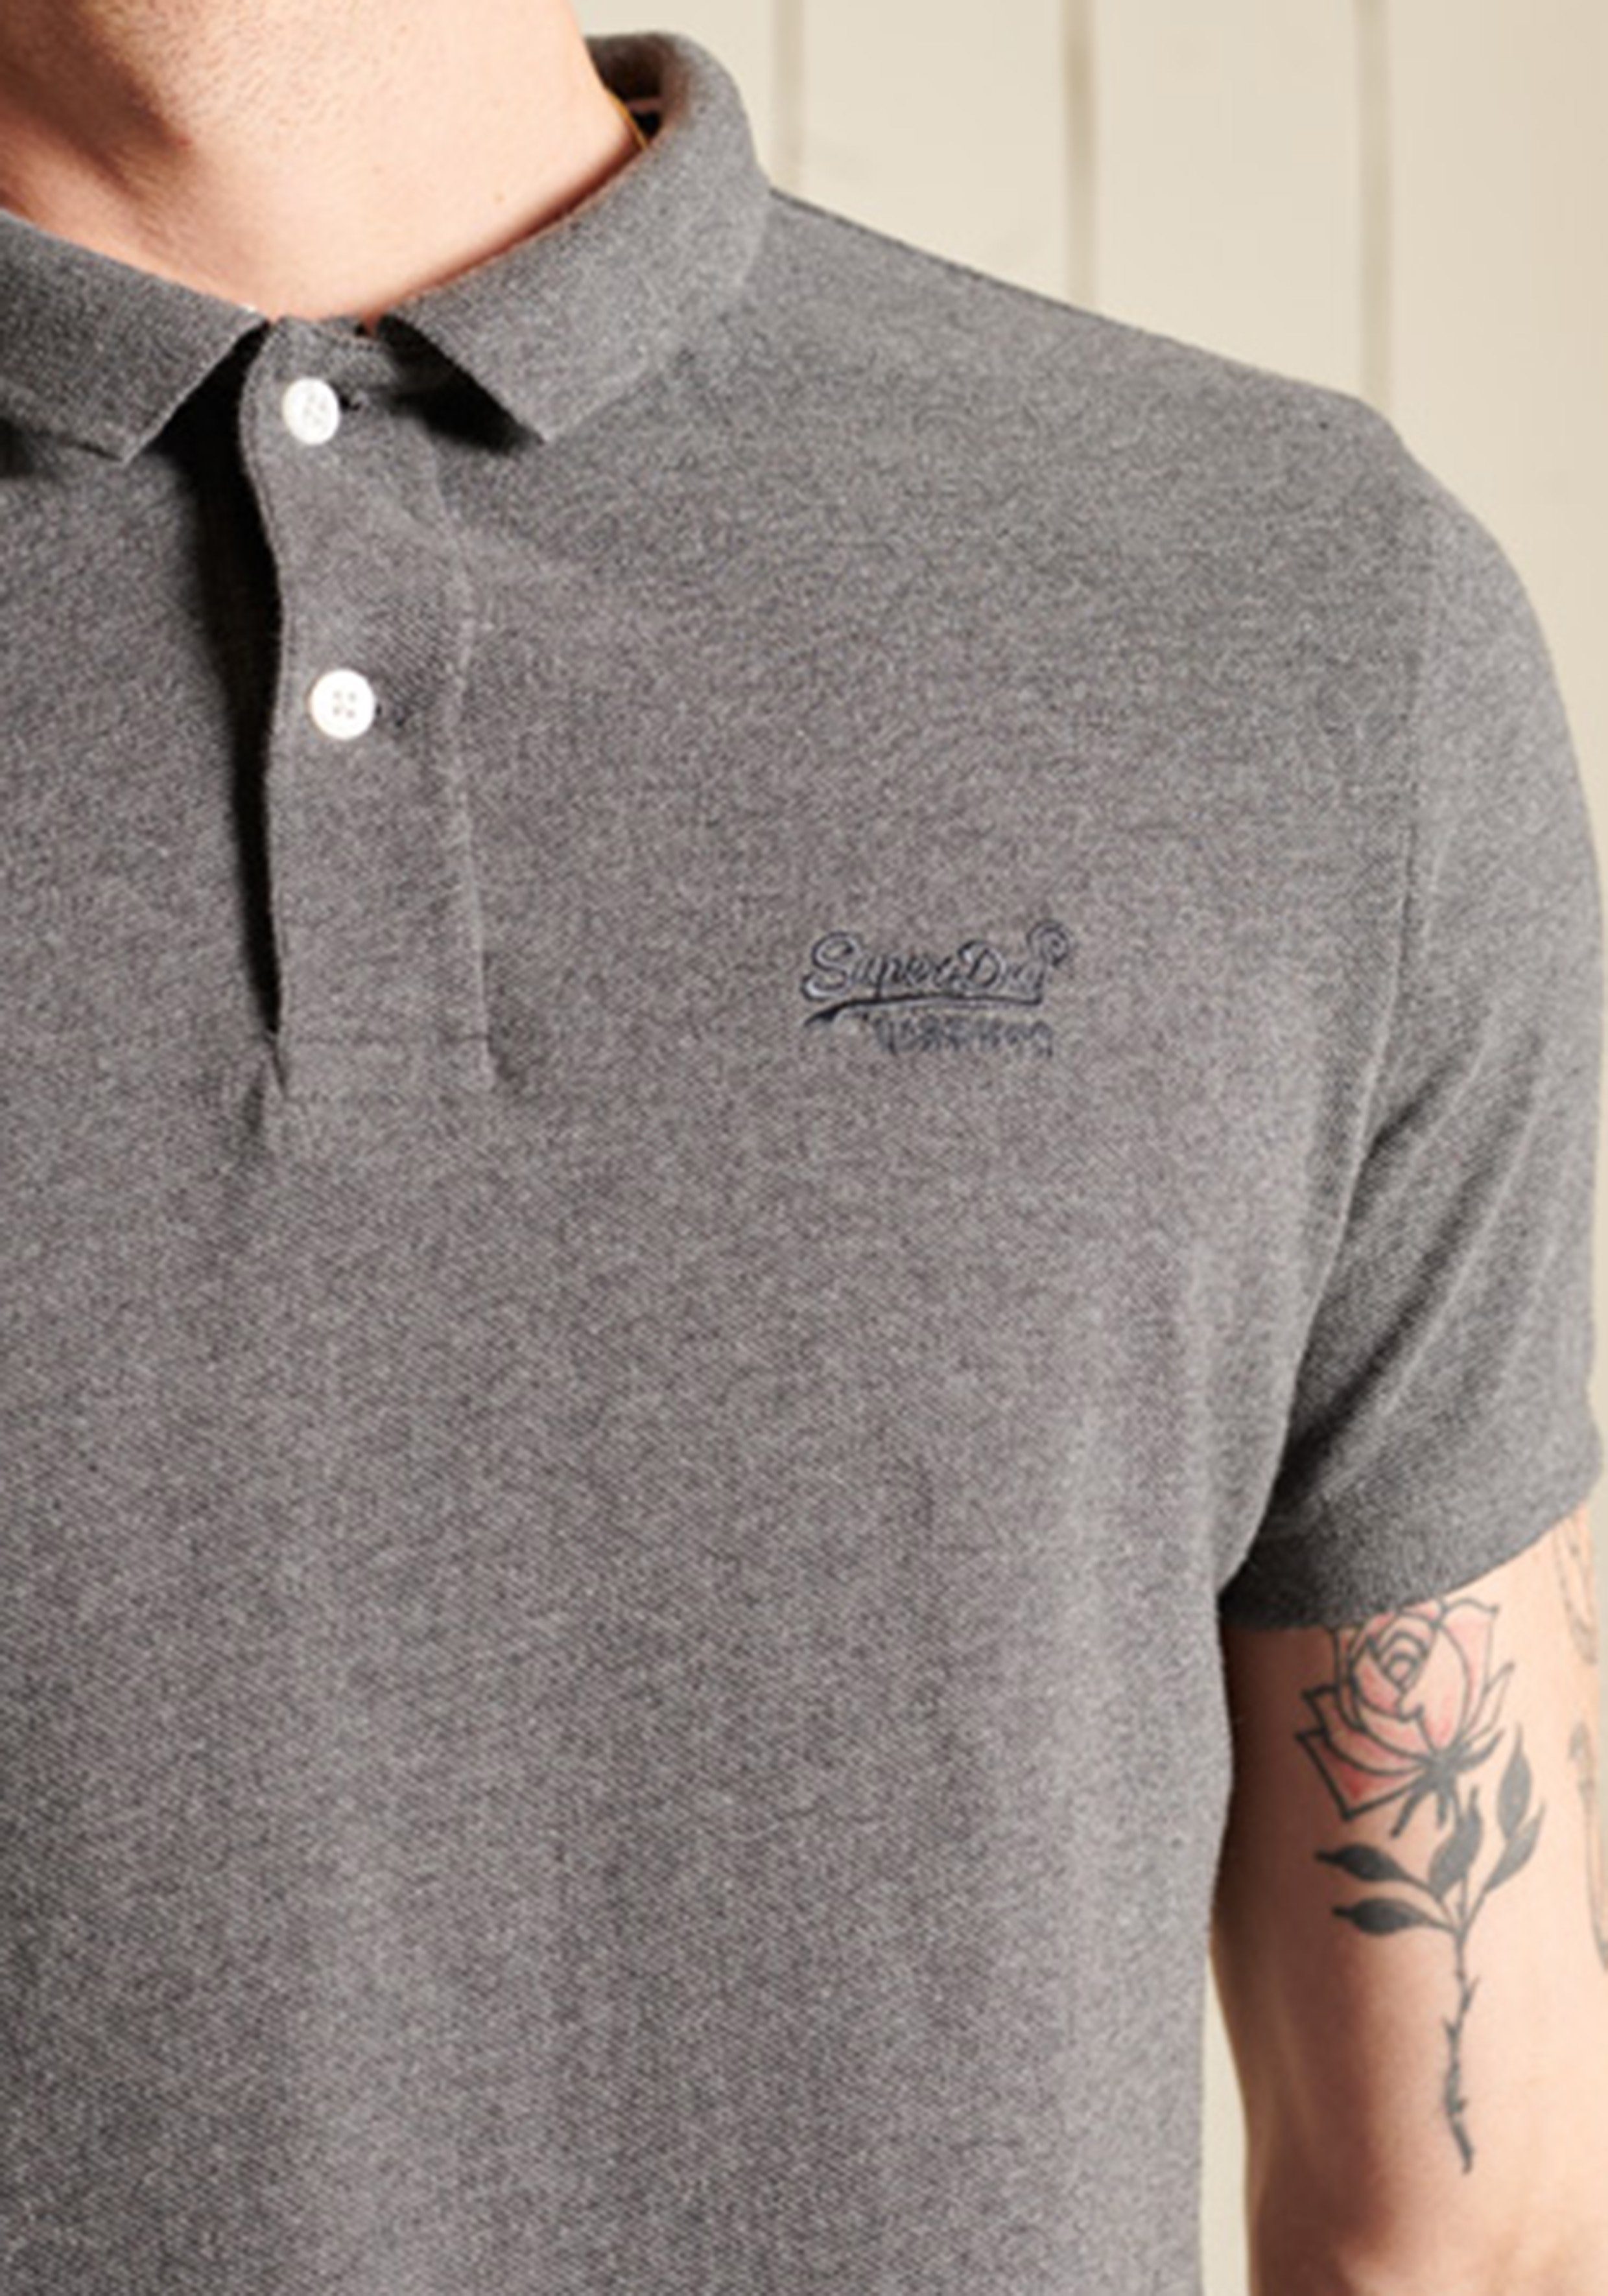 rich POLO marl CLASSIC PIQUE Poloshirt Superdry charcoal